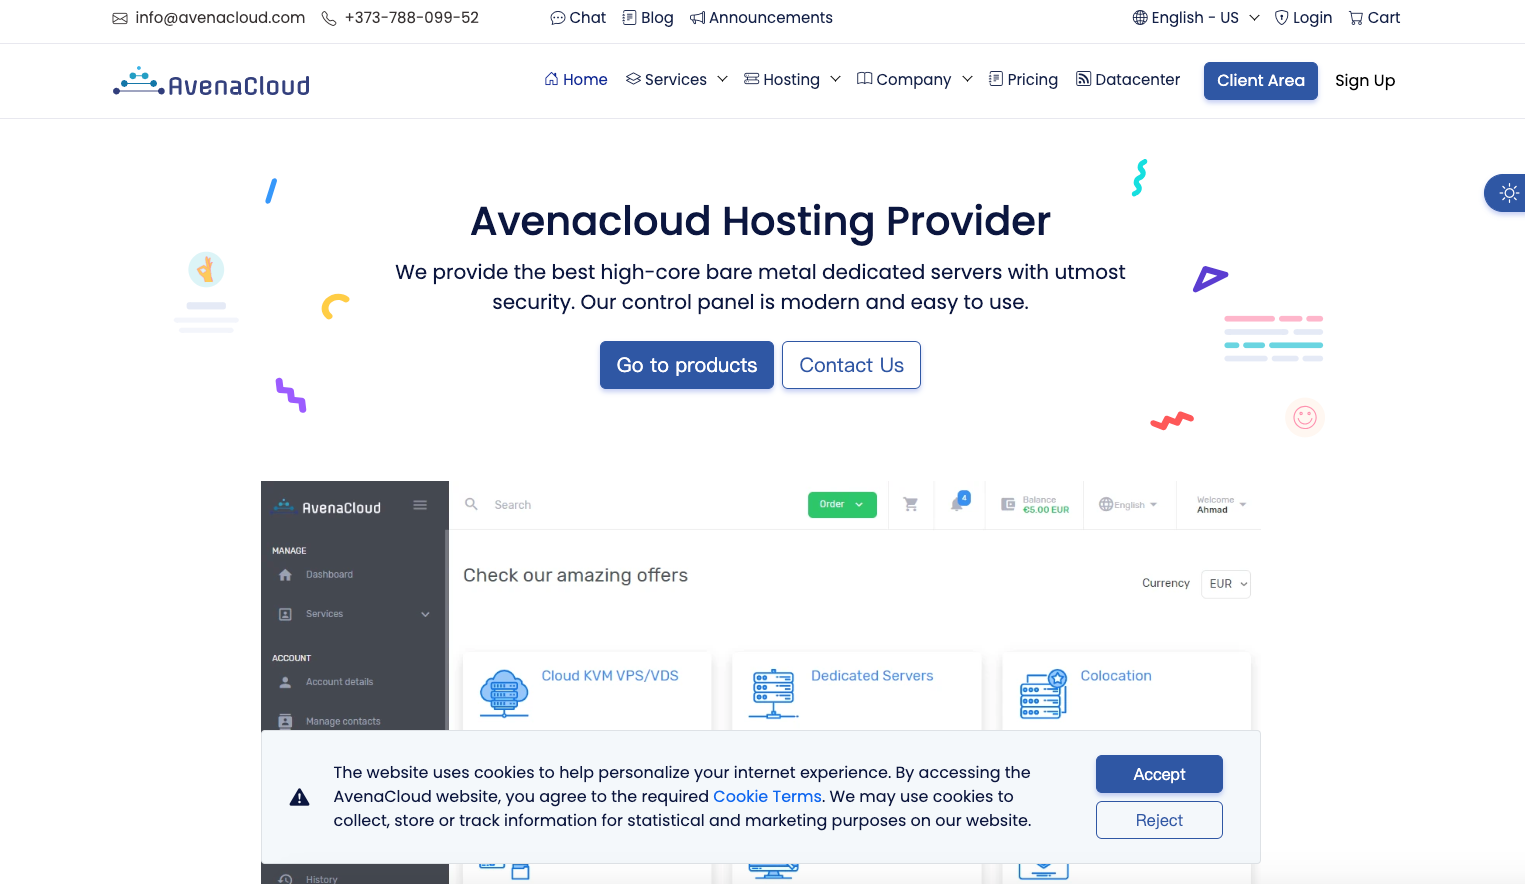 VPS for € 19.15/Year "Unlocking Affordable Excellence — AvenaCloud's Cutting-Edge Hosting Services"